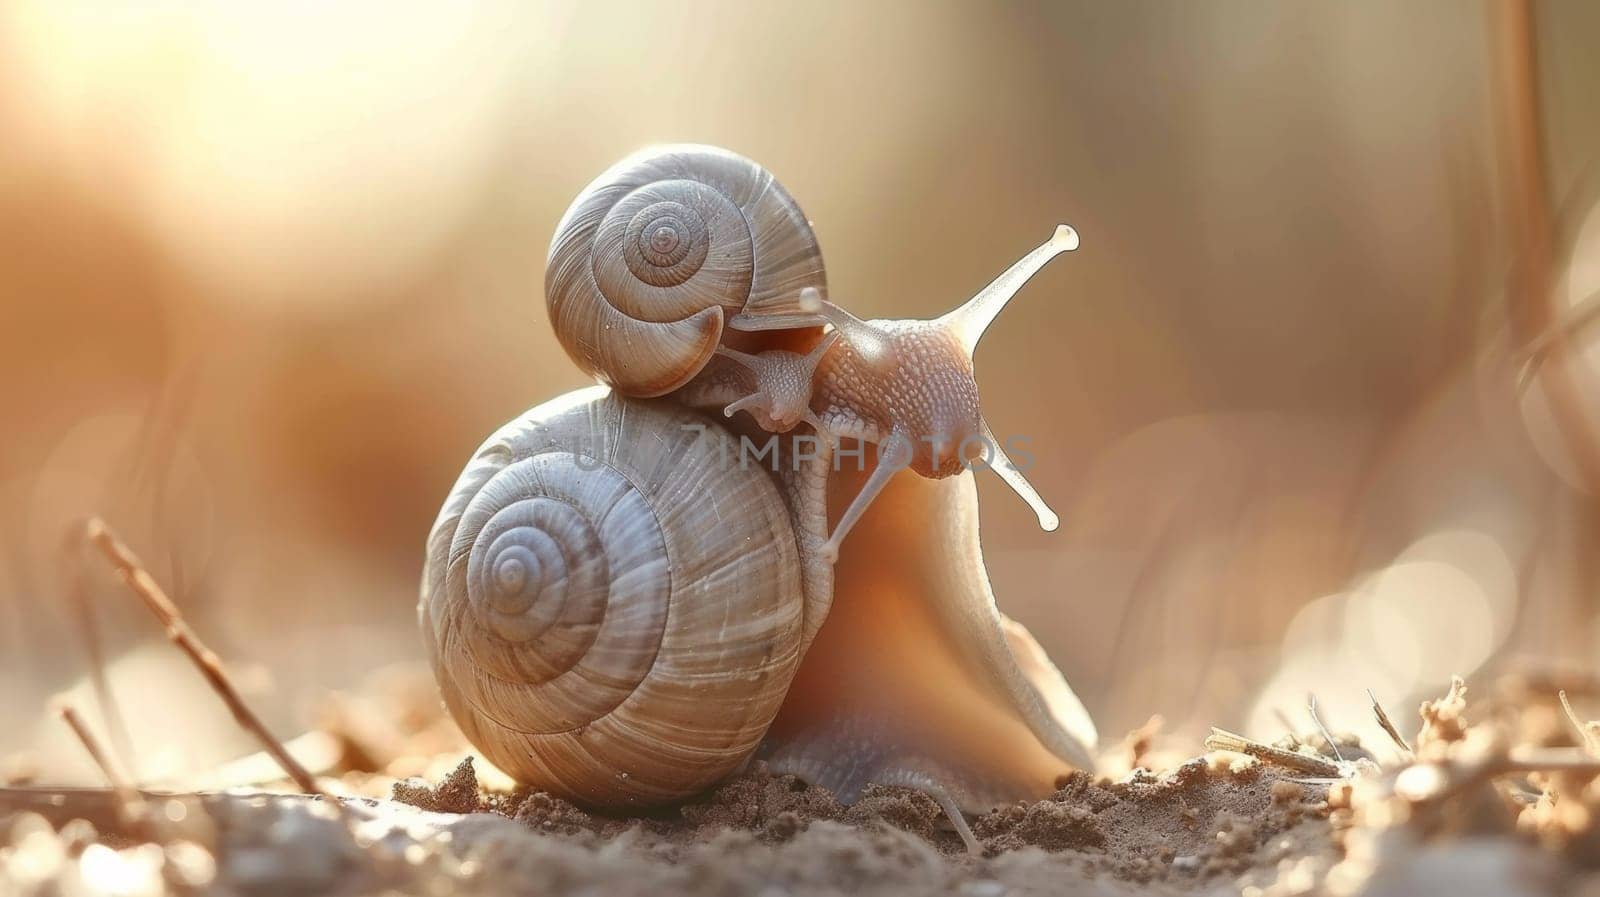 Two snails are standing on top of each other